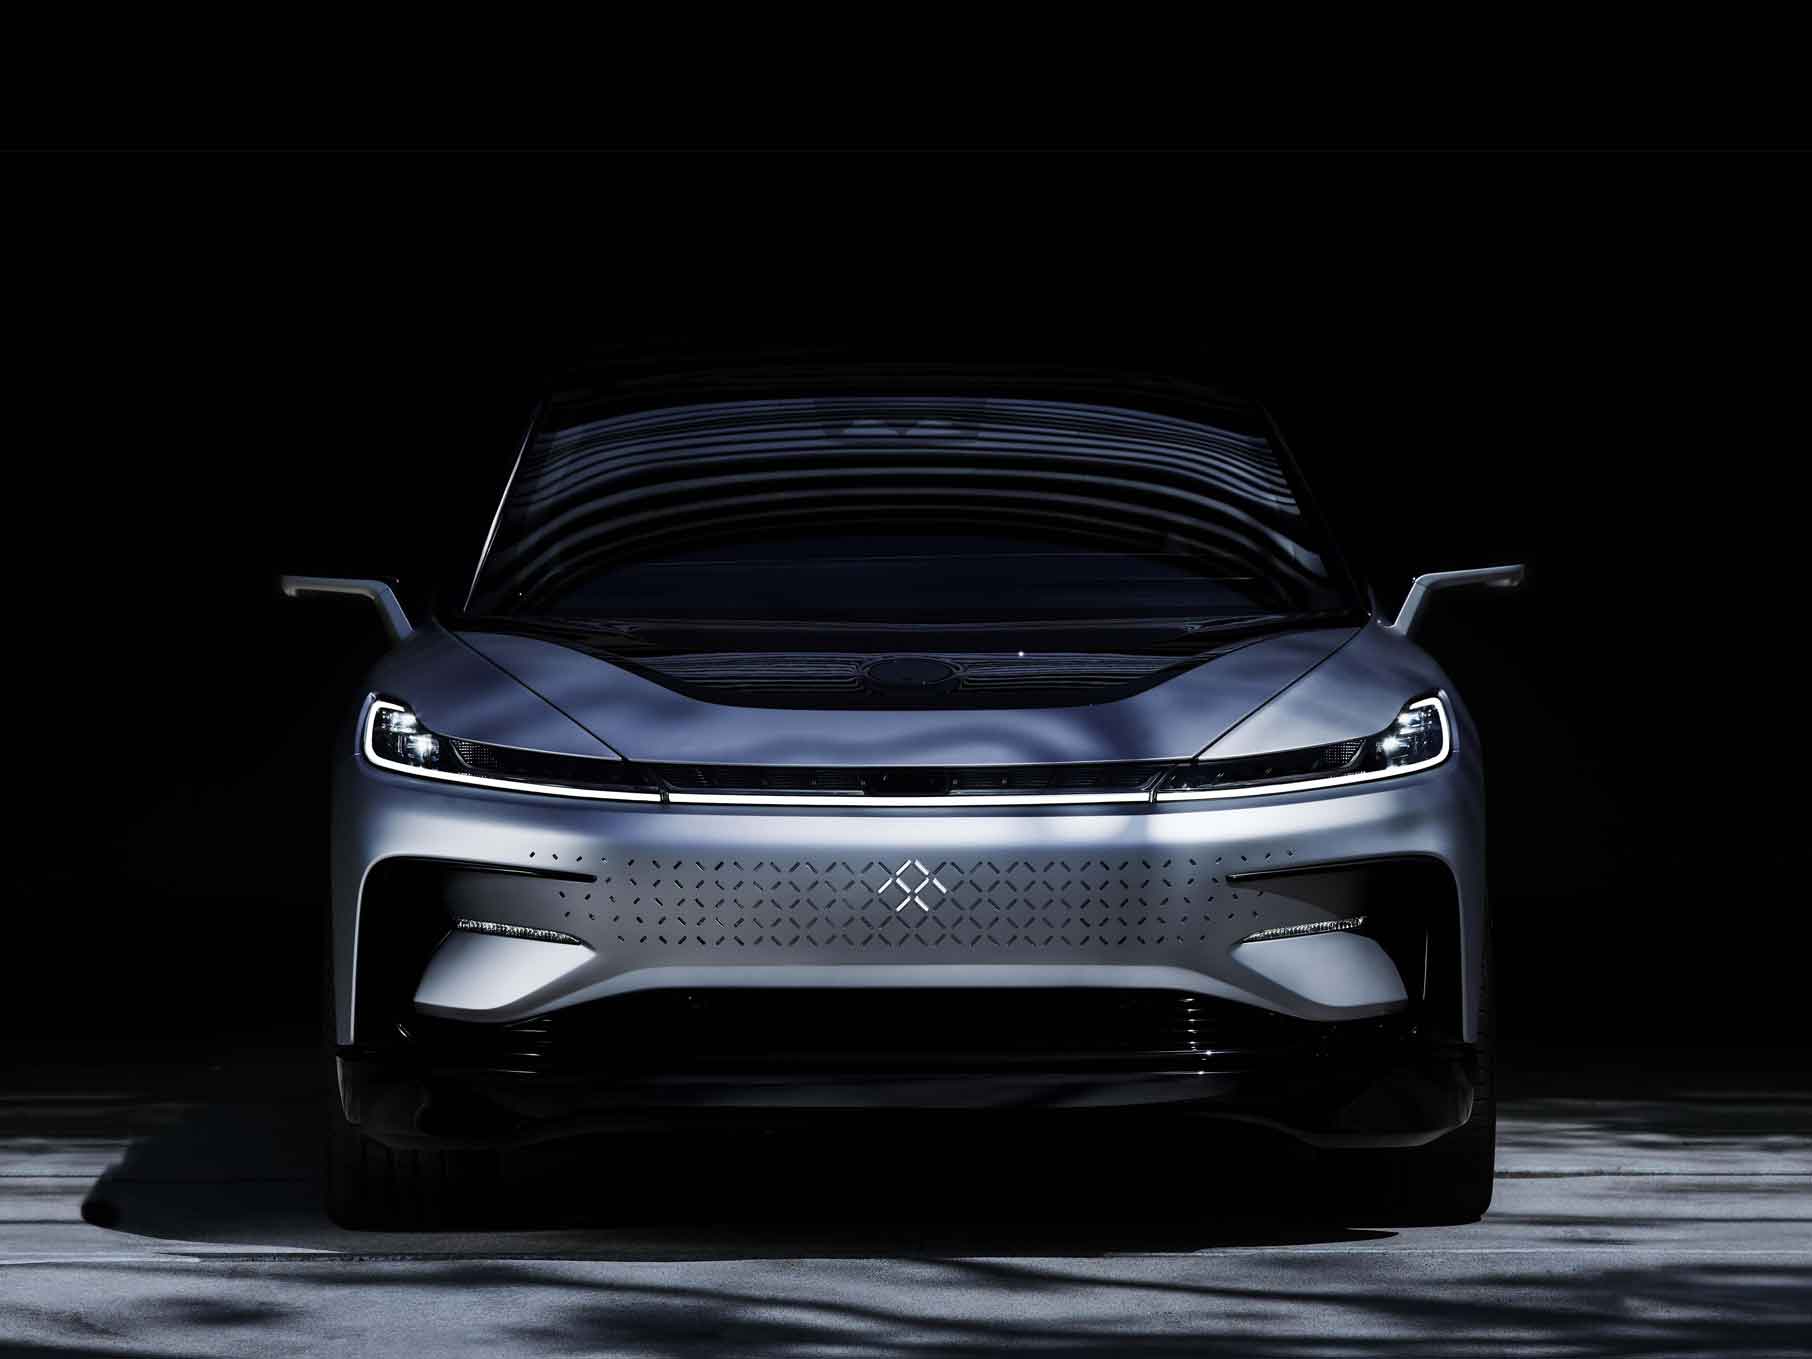 Faraday Future Joins ZETA; Supports an Accelerated Transition to